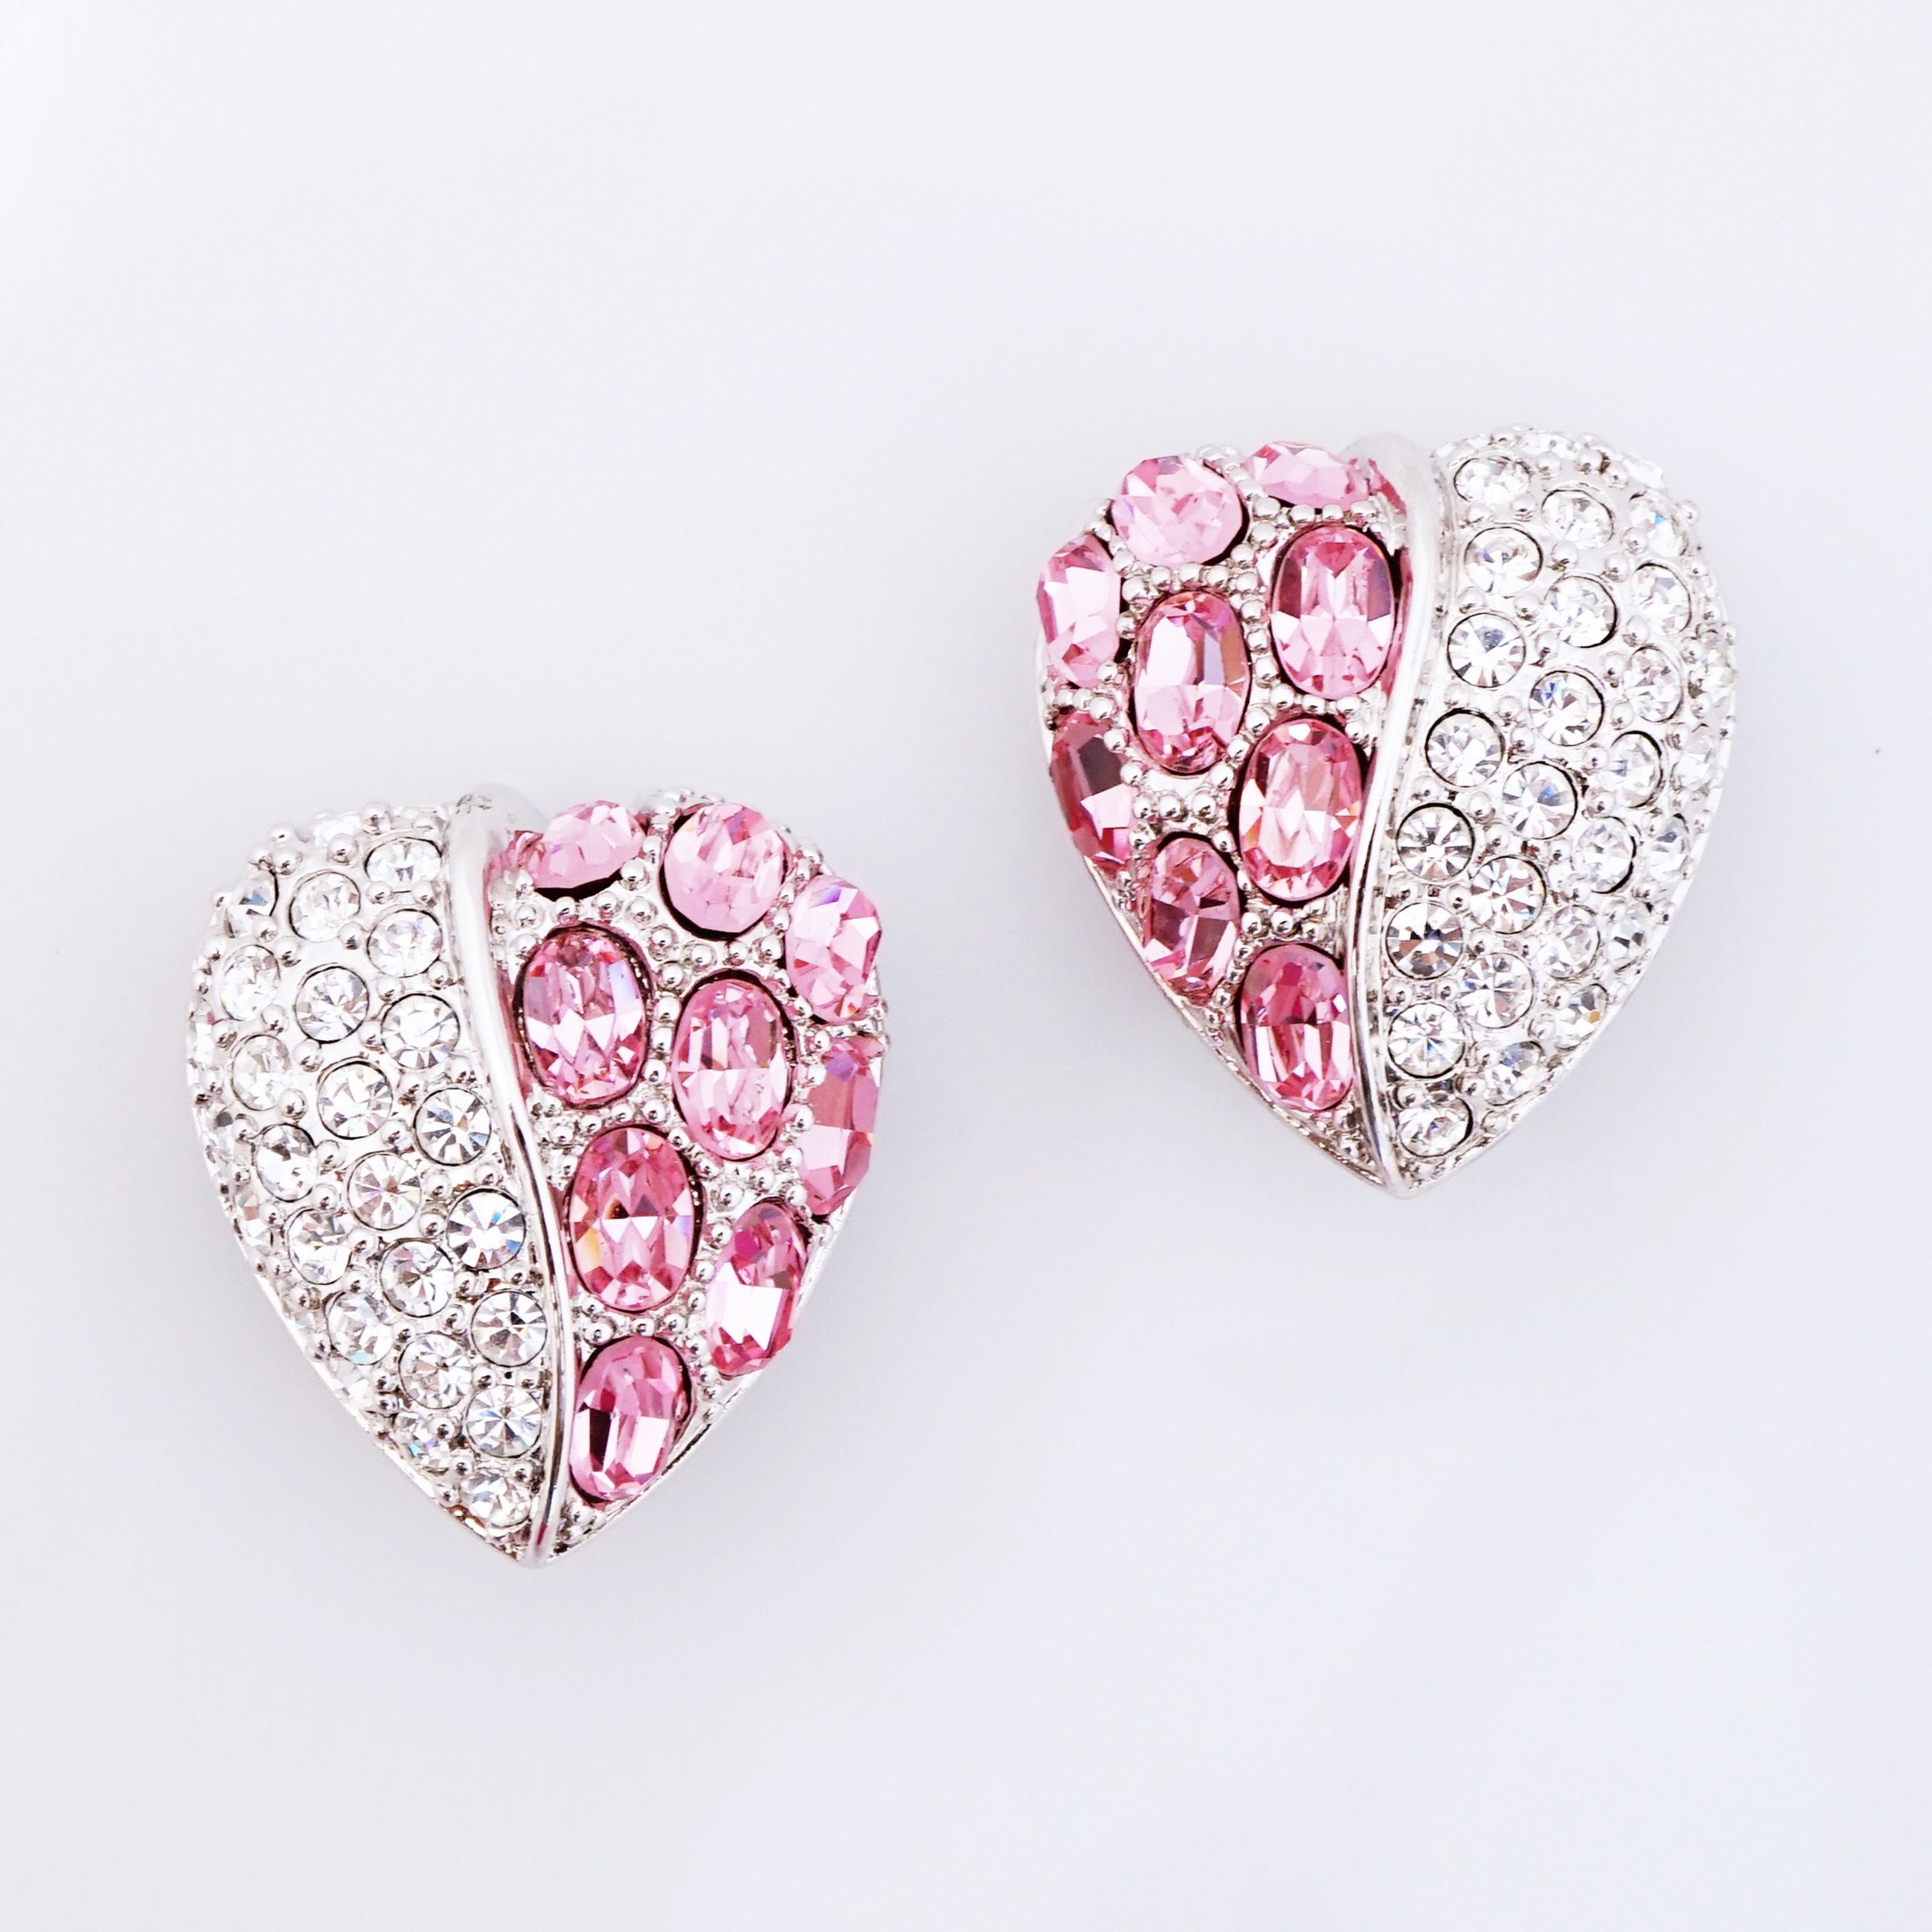 Modern Silver Heart Statement Earrings With Pink Crystal Pavé By Nolan Miller, 1980s